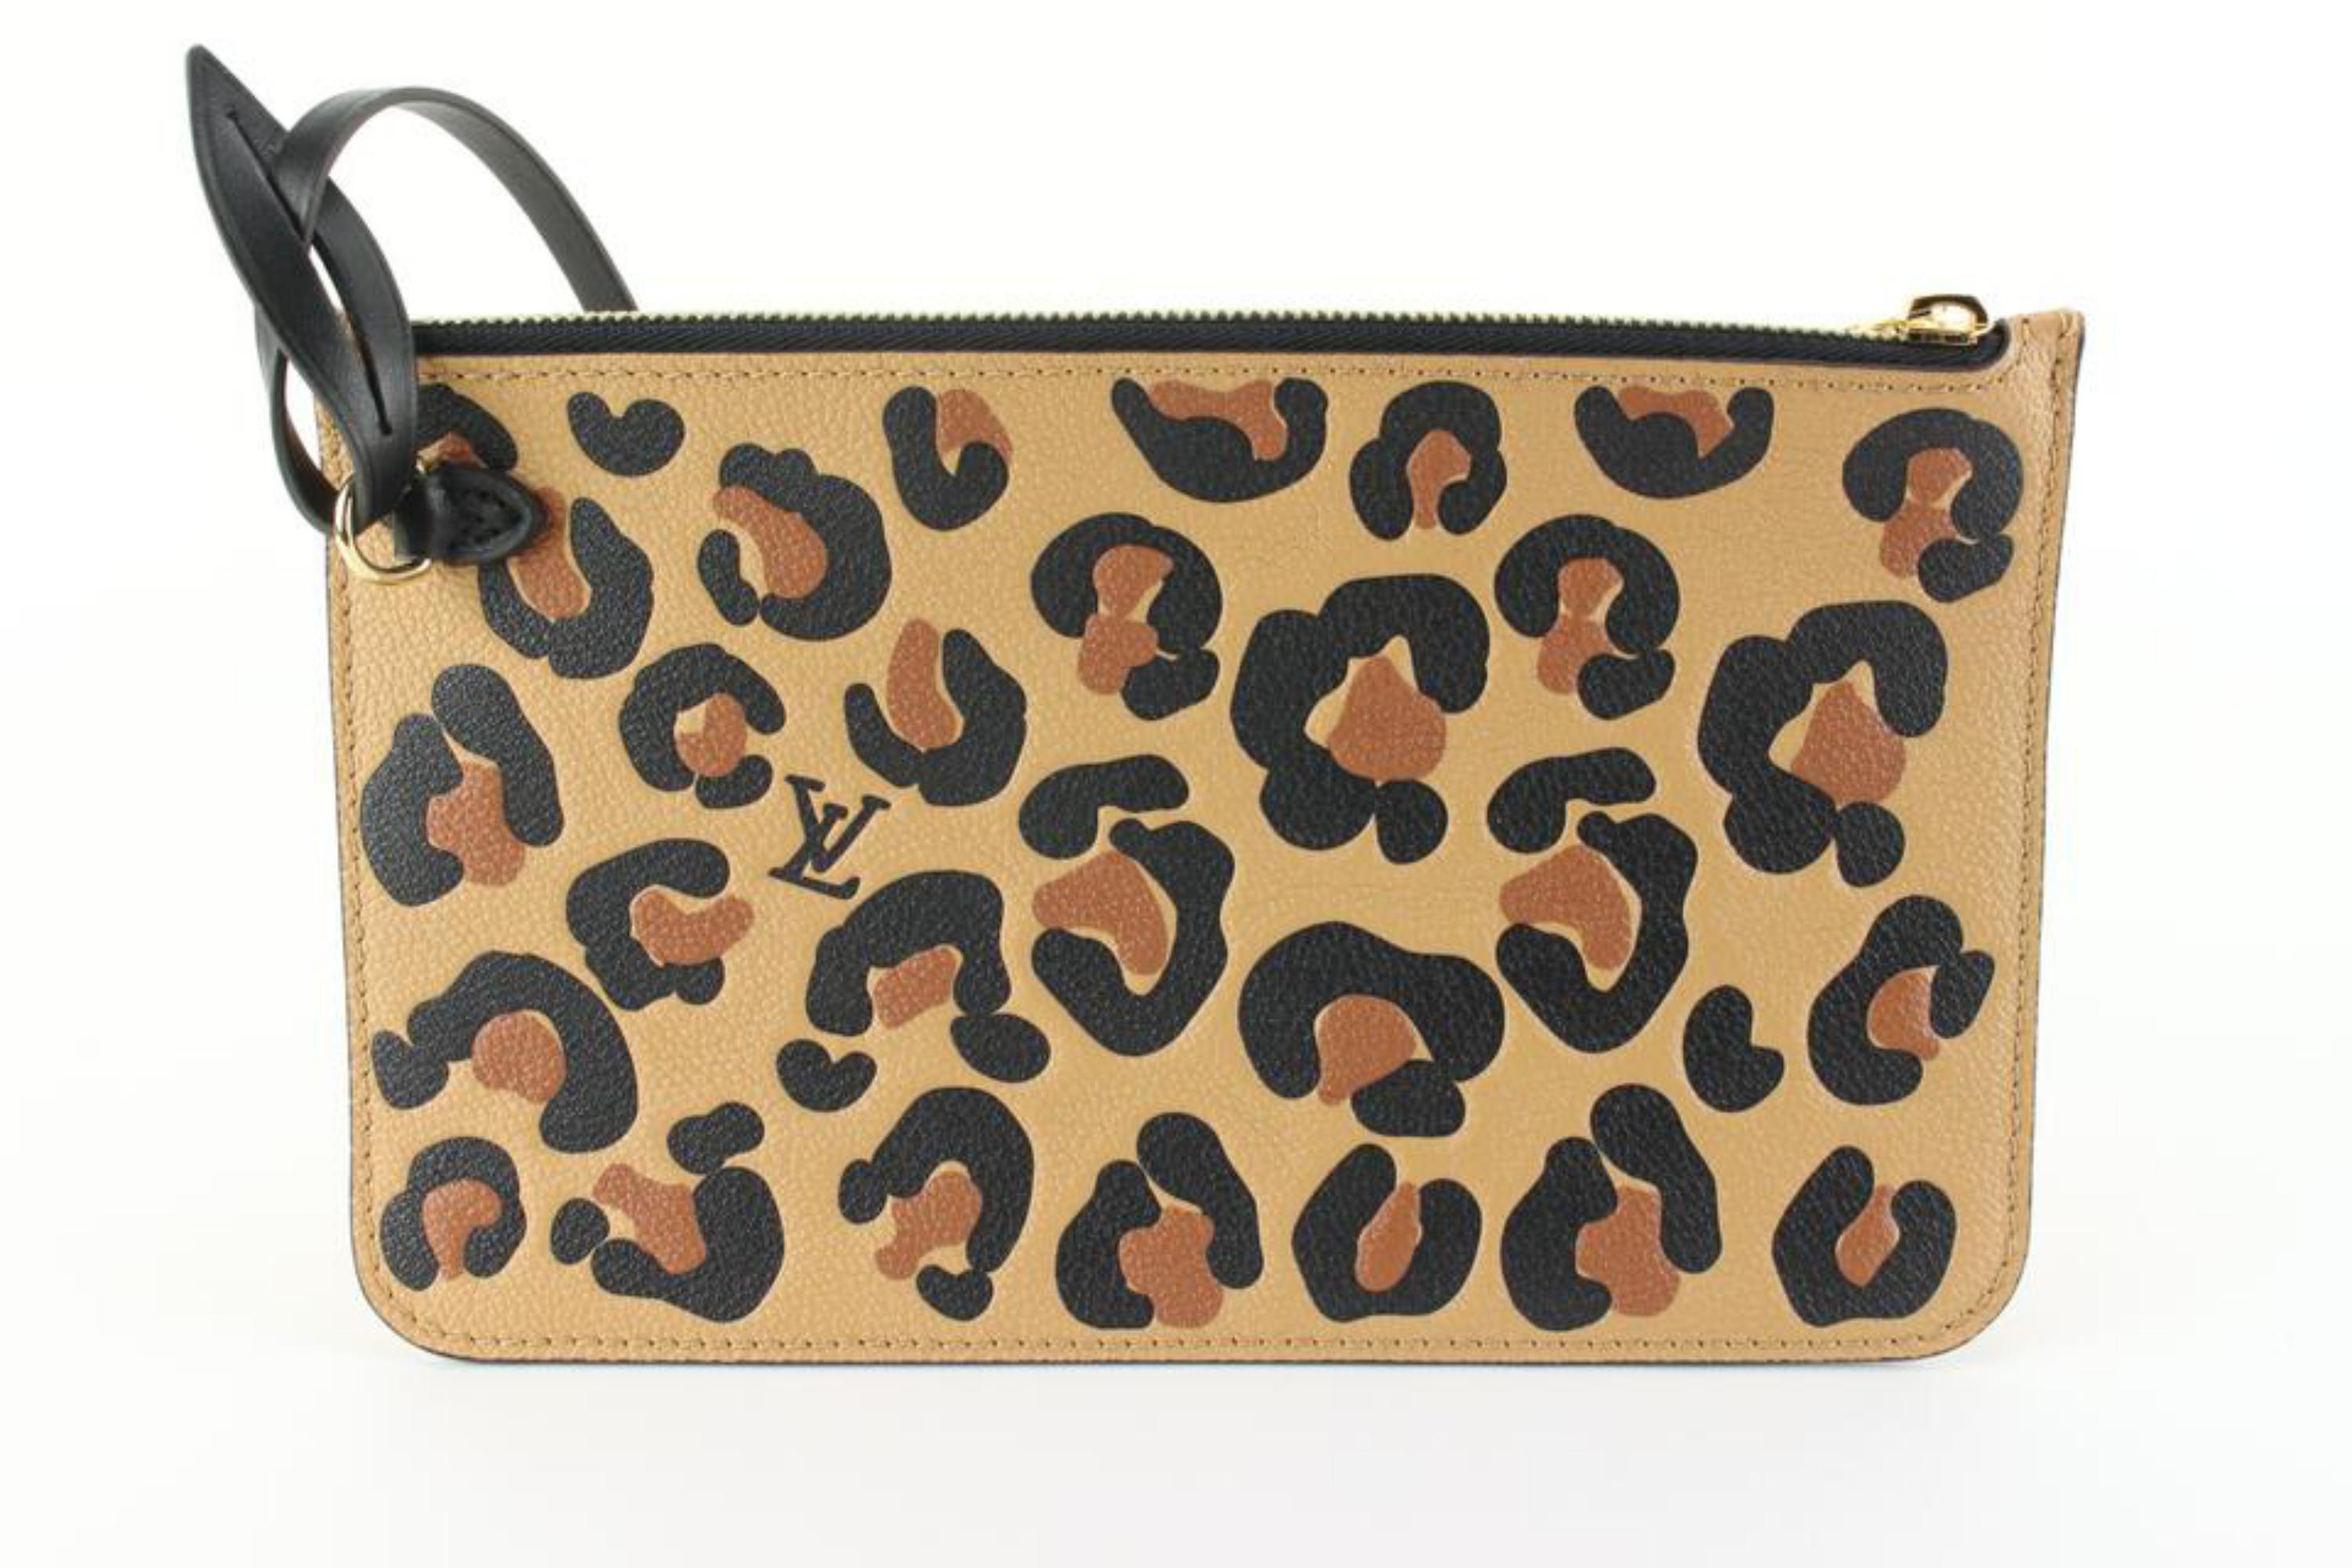 Louis Vuitton Leather Monogram Empreinte Wild at Heart Neverfull Pochette 96lk89 In New Condition For Sale In Dix hills, NY